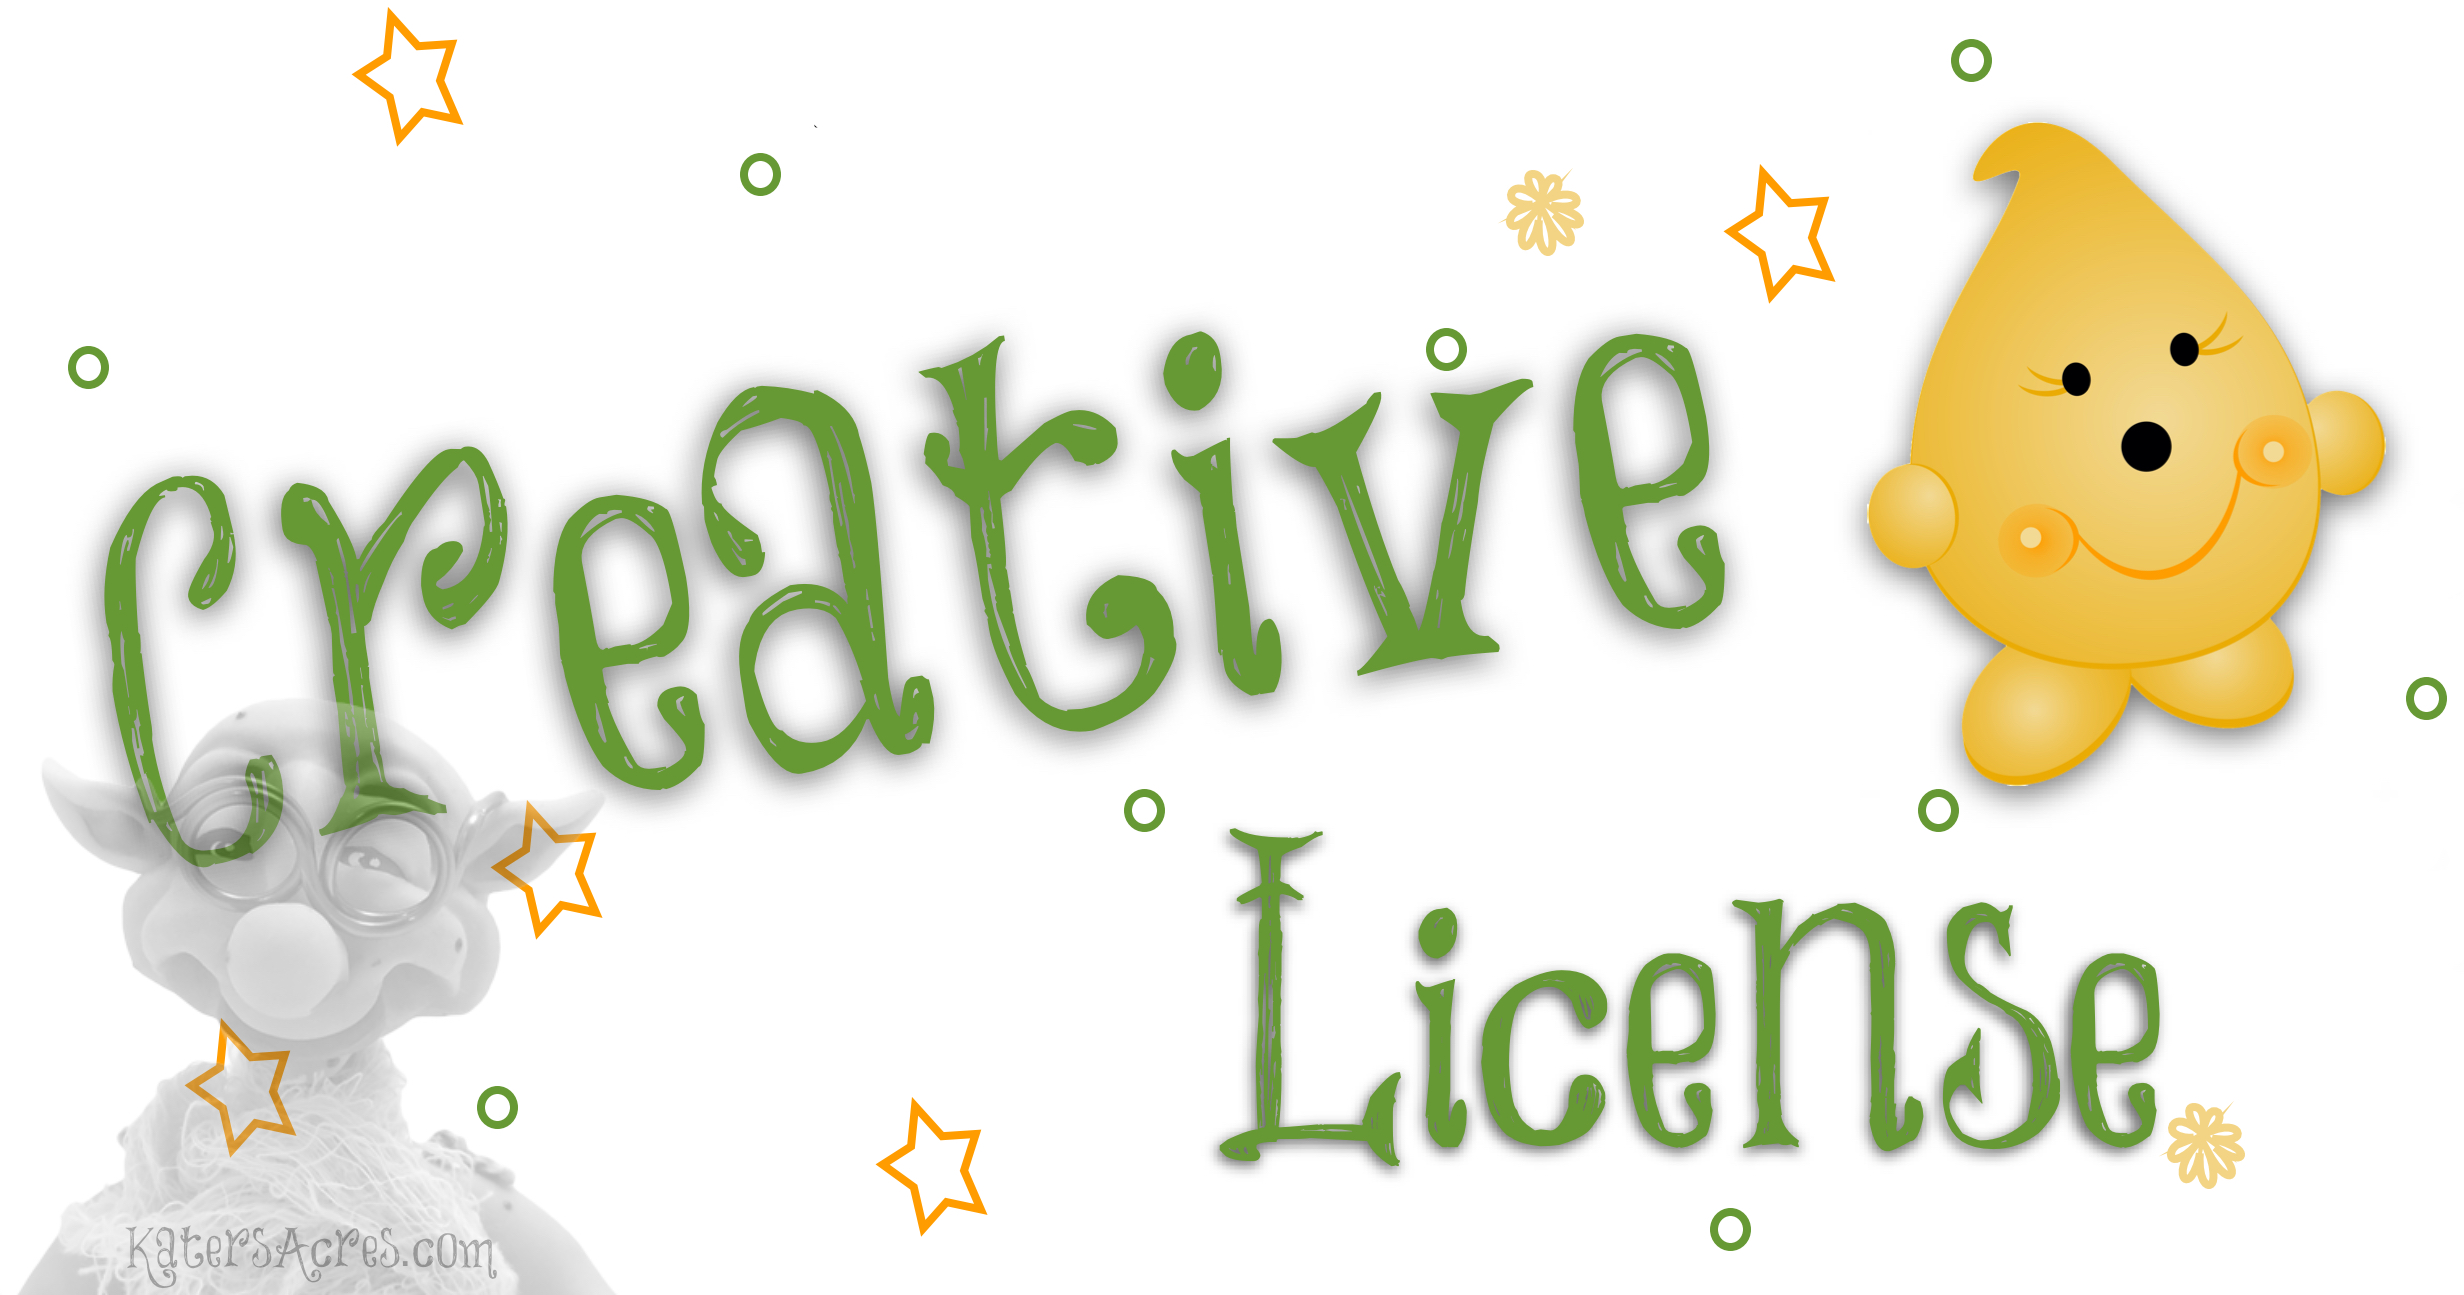 Creative License from KatersAcres.com